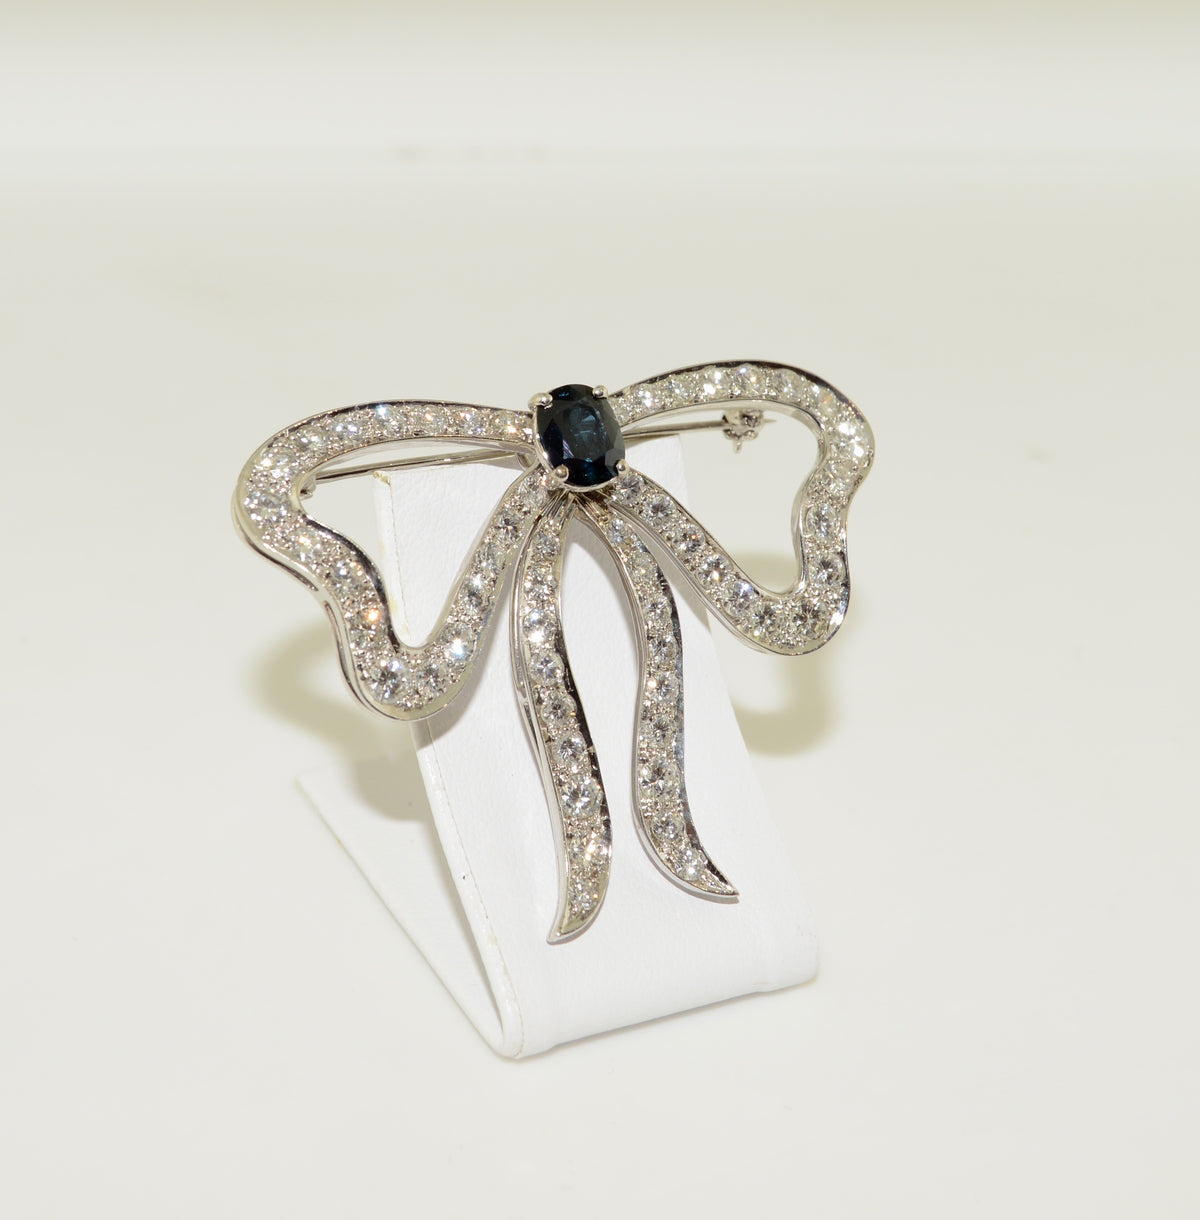 14K White Gold Diamond and Genuine Sapphire Bow Brooch